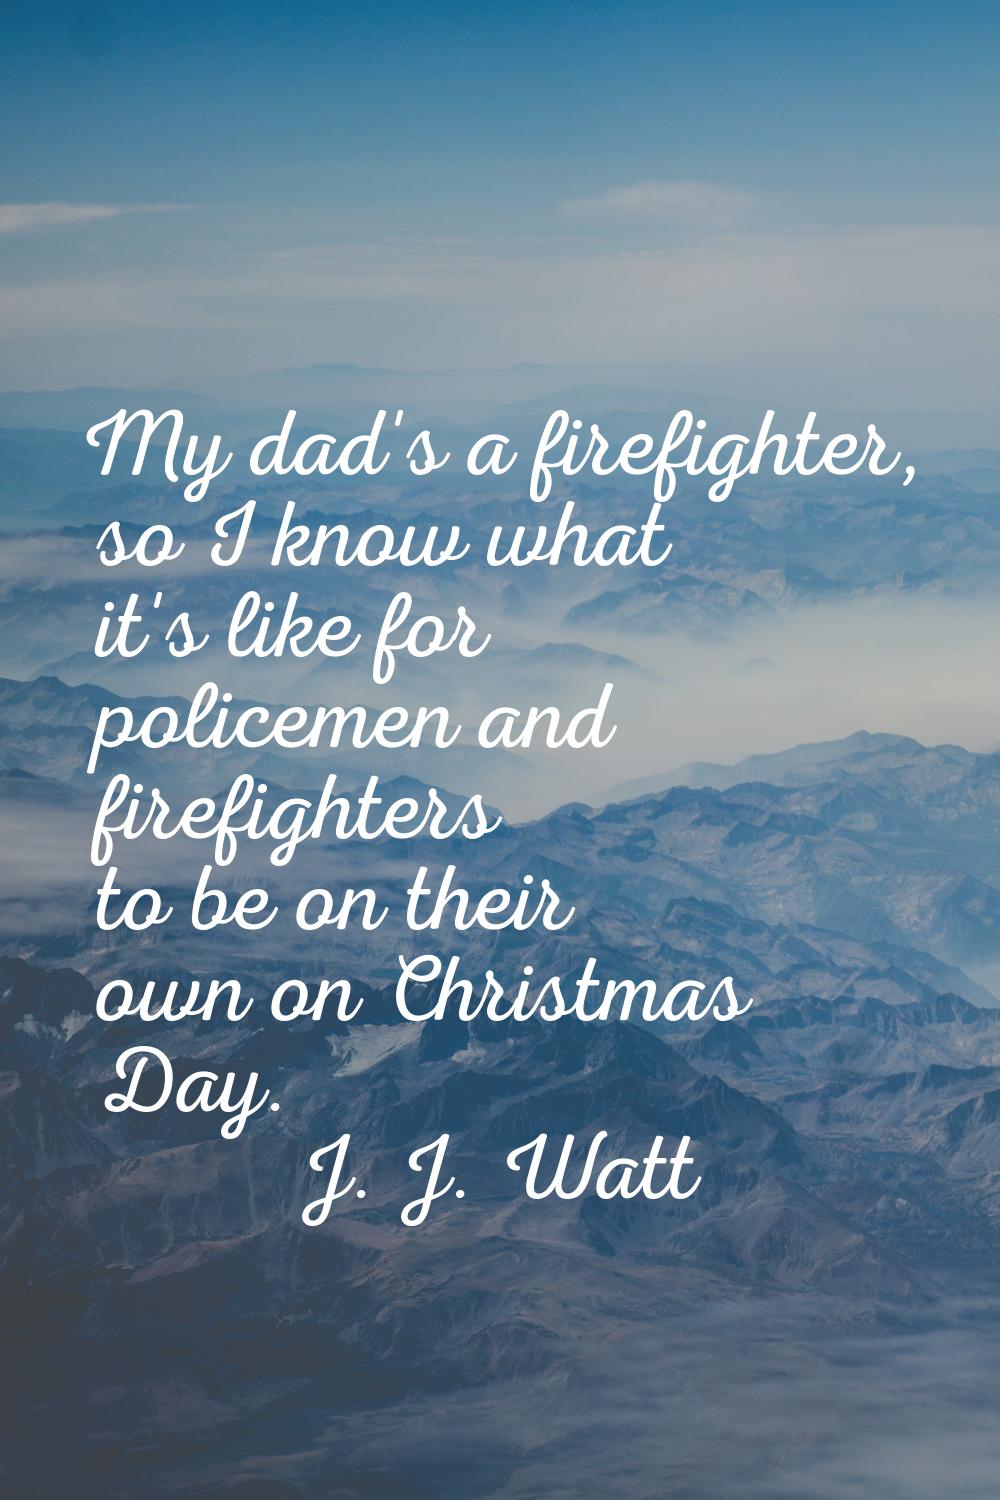 My dad's a firefighter, so I know what it's like for policemen and firefighters to be on their own 